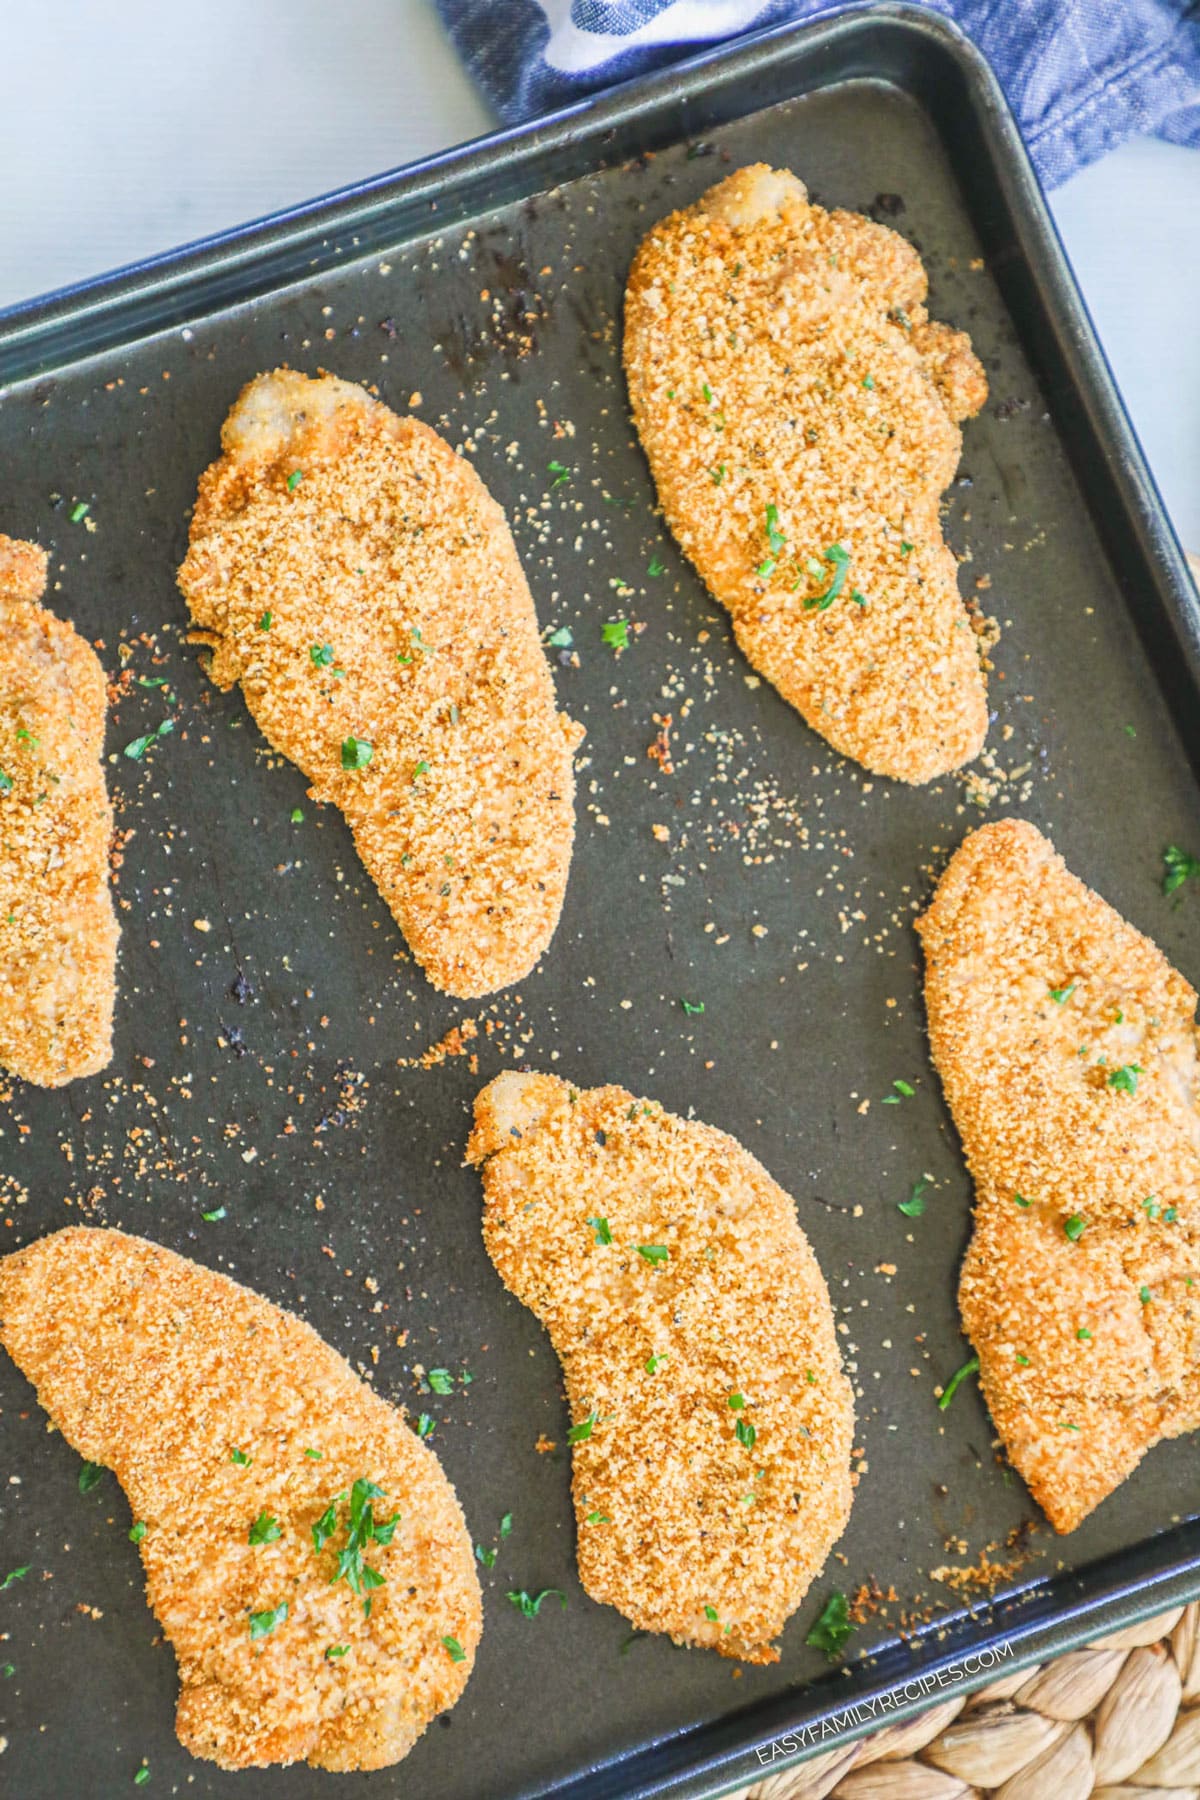 Pork Chops covered in shake and bake on a cookie sheet.